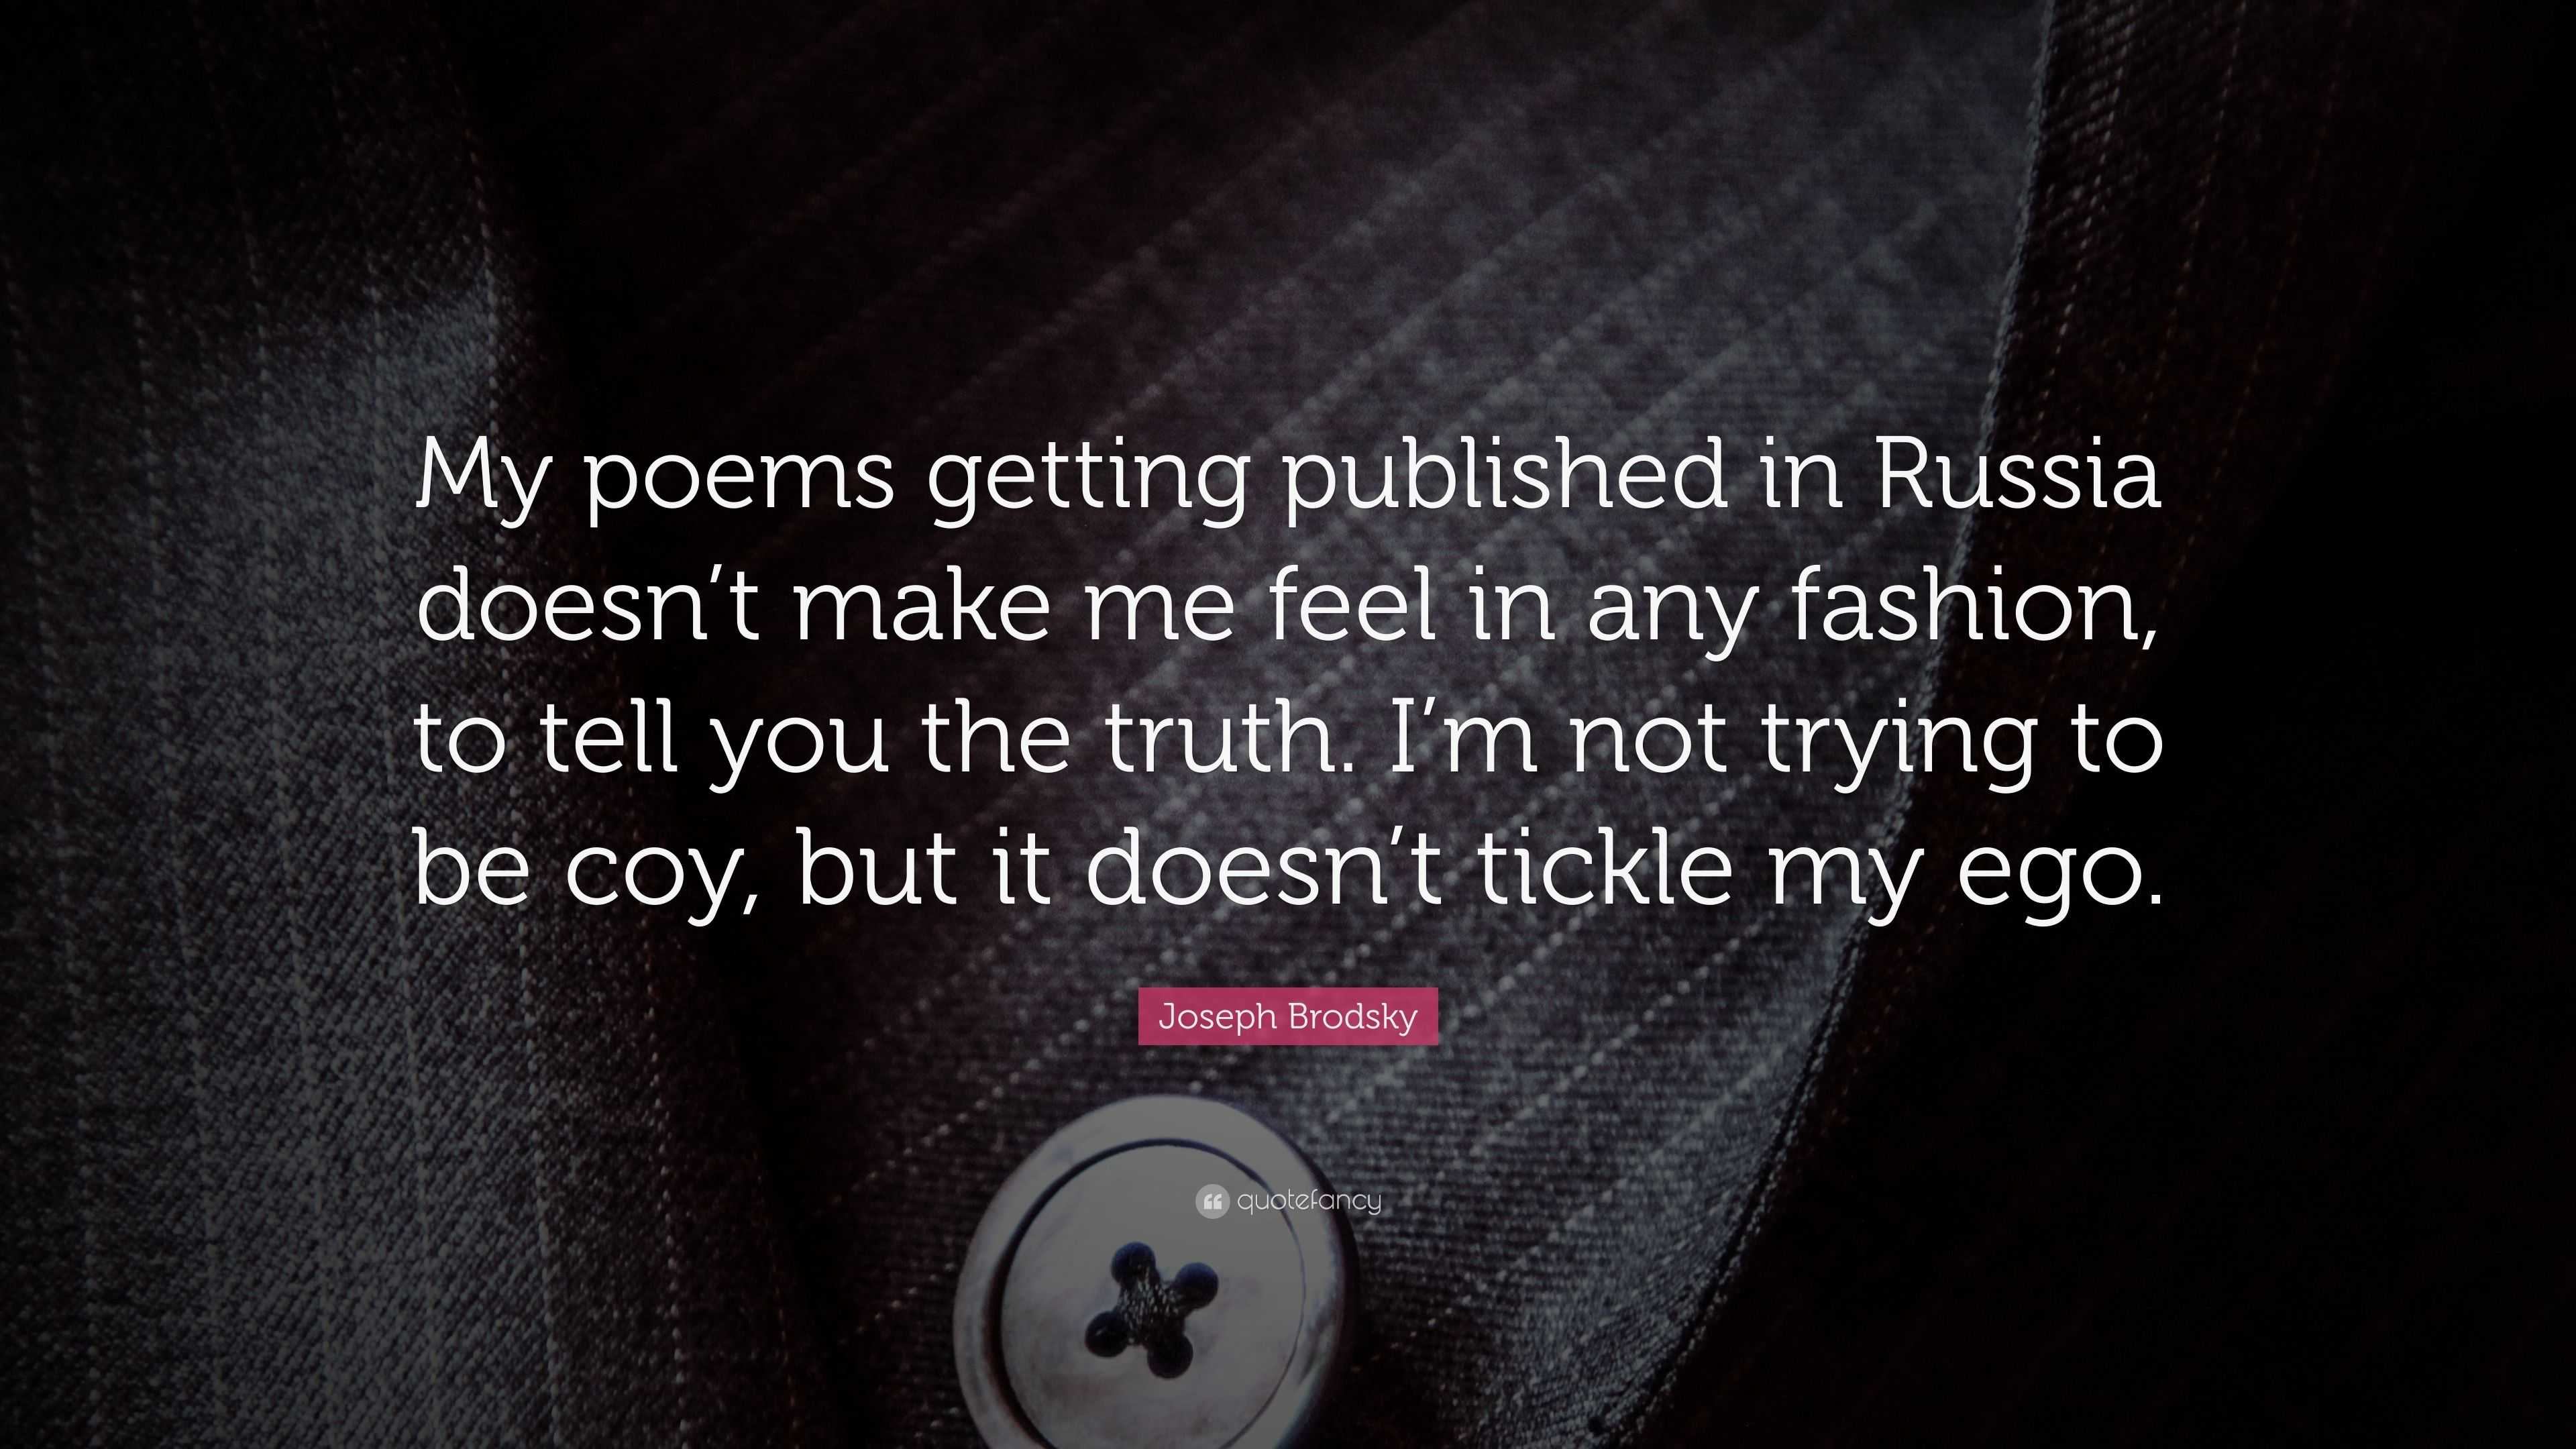 Joseph Brodsky Quote: “My poems getting published in Russia doesn’t